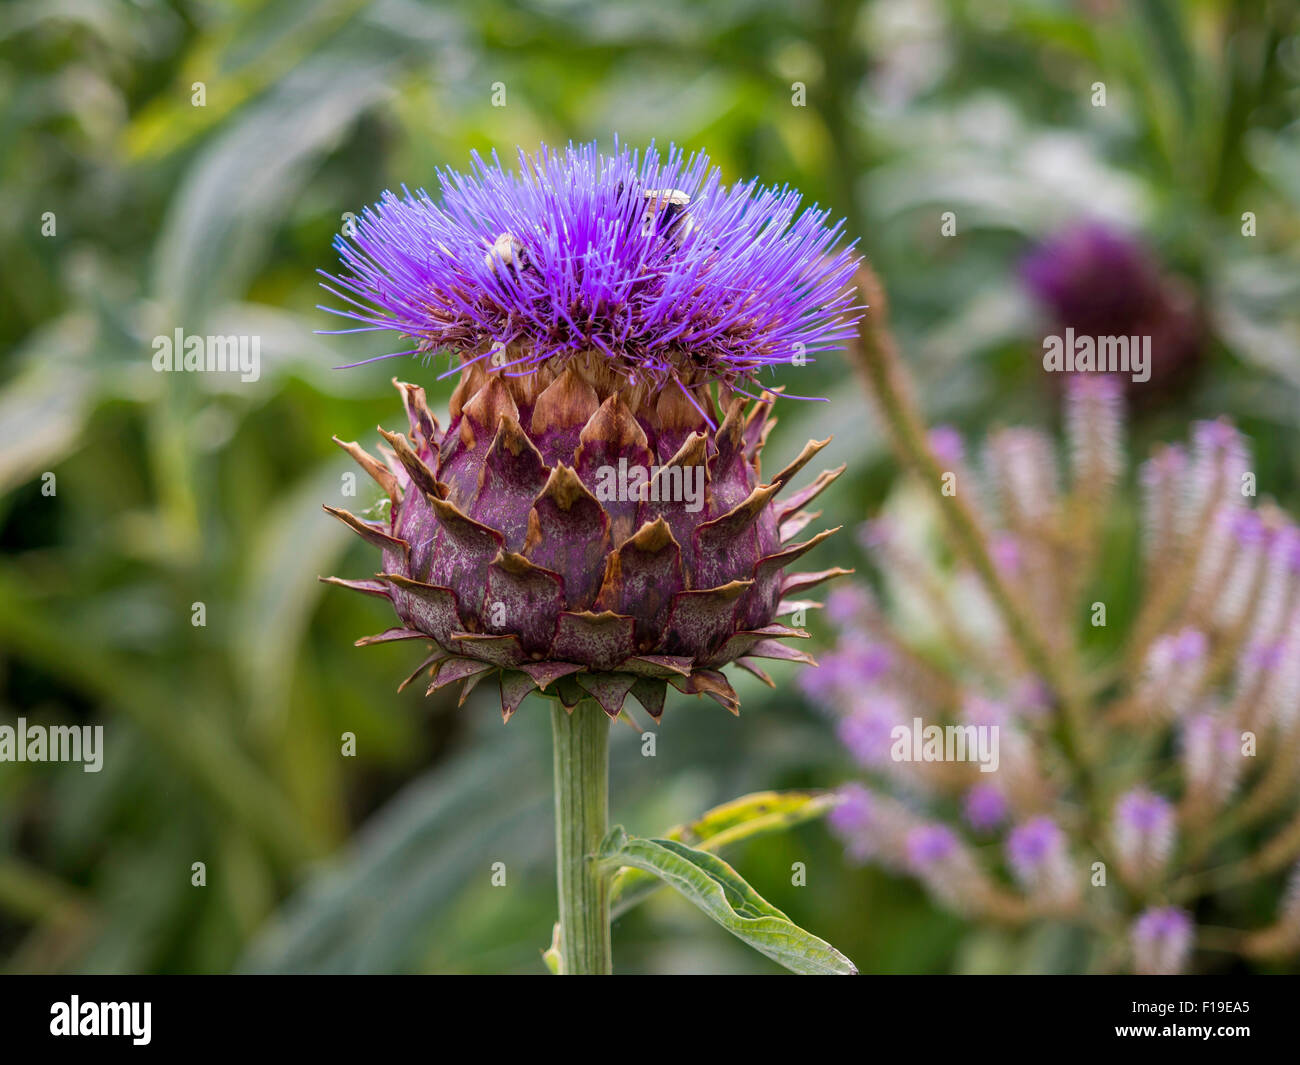 A Cardoon Cynara cardunculus also called the artichoke thistle cultivated in England UK with bumble bees foraging in the flower Stock Photo